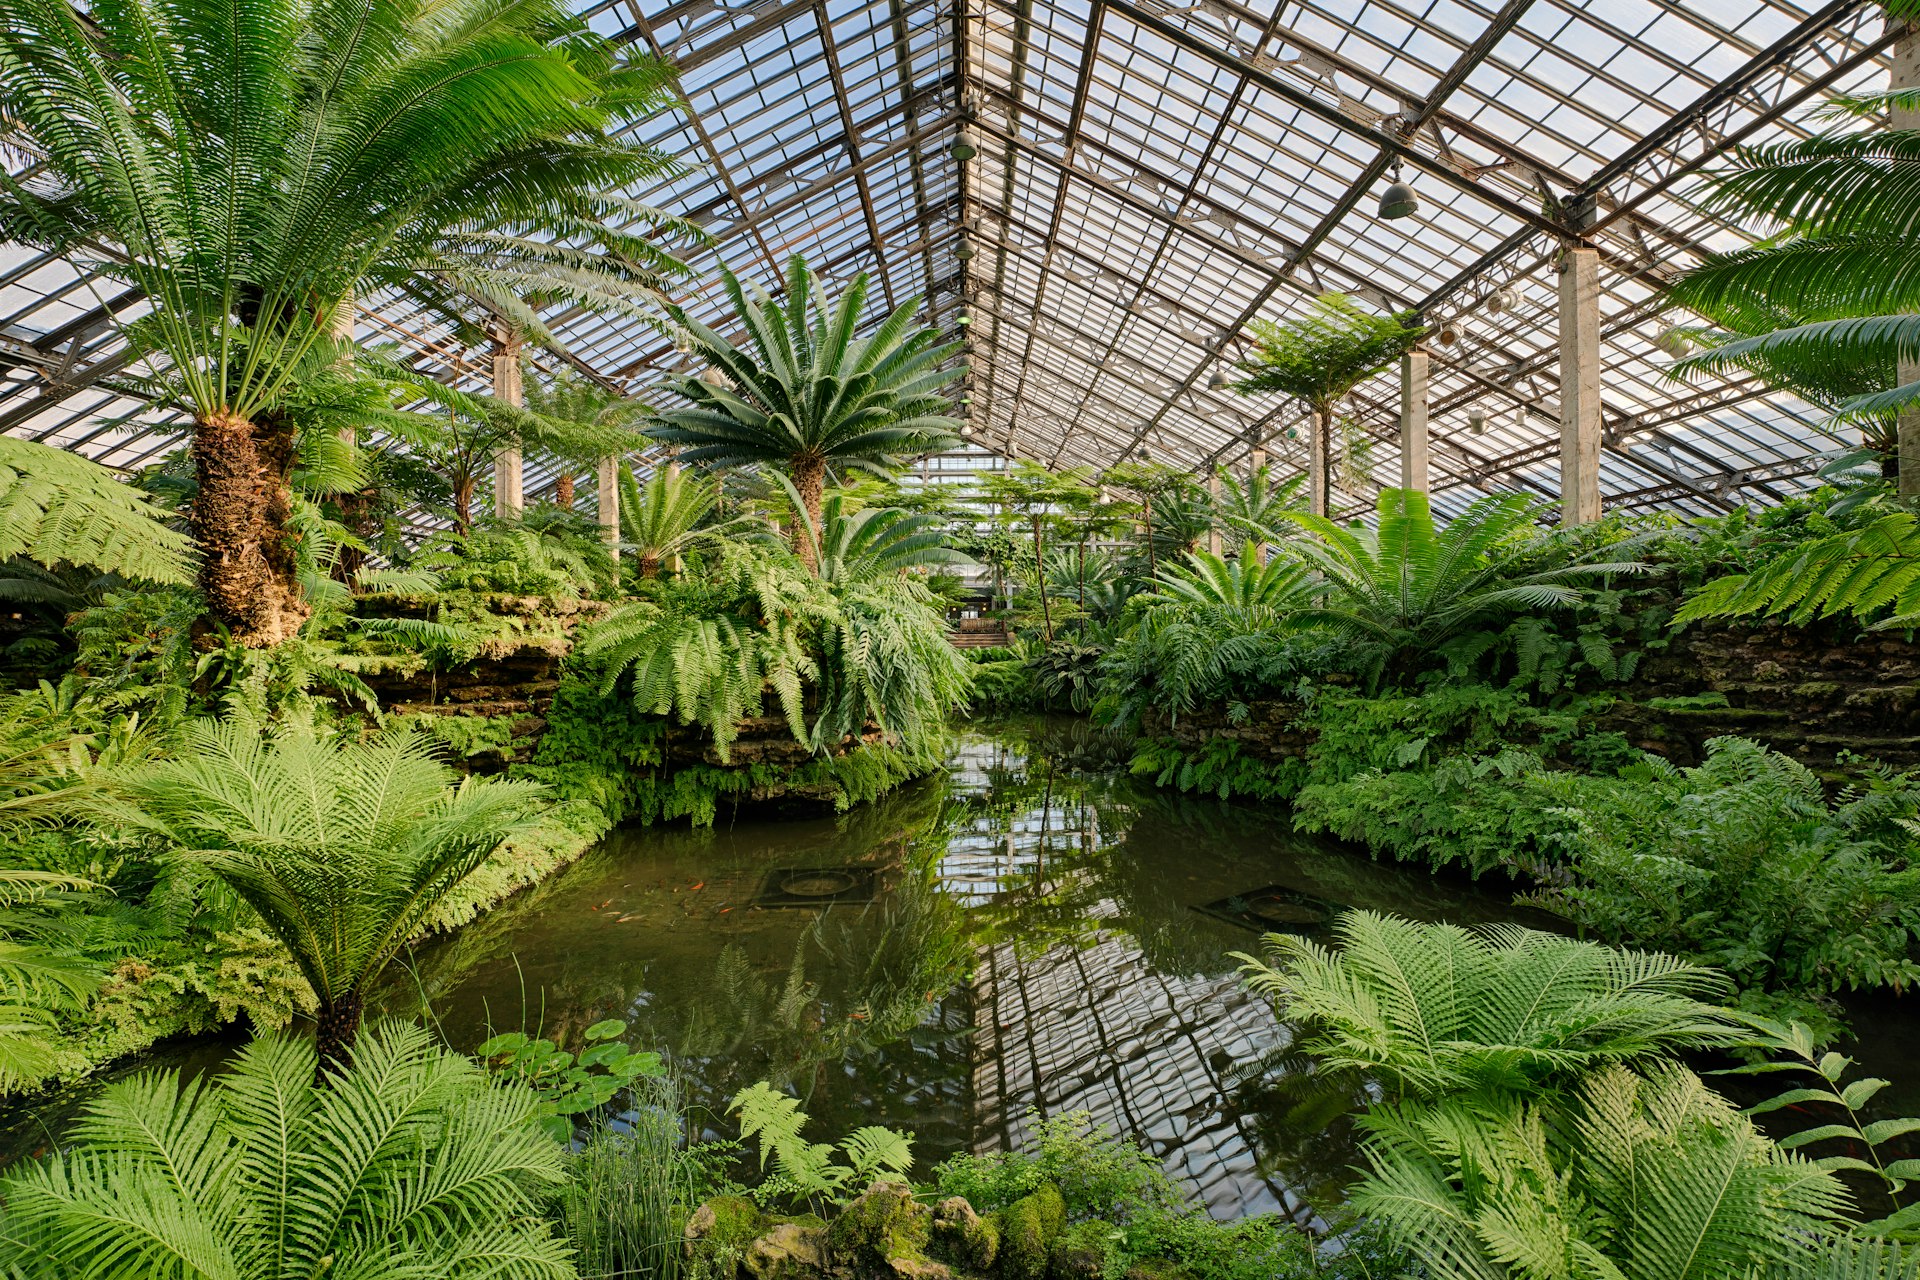 Fern Room of the Garfield Park Conservatory in Chicago